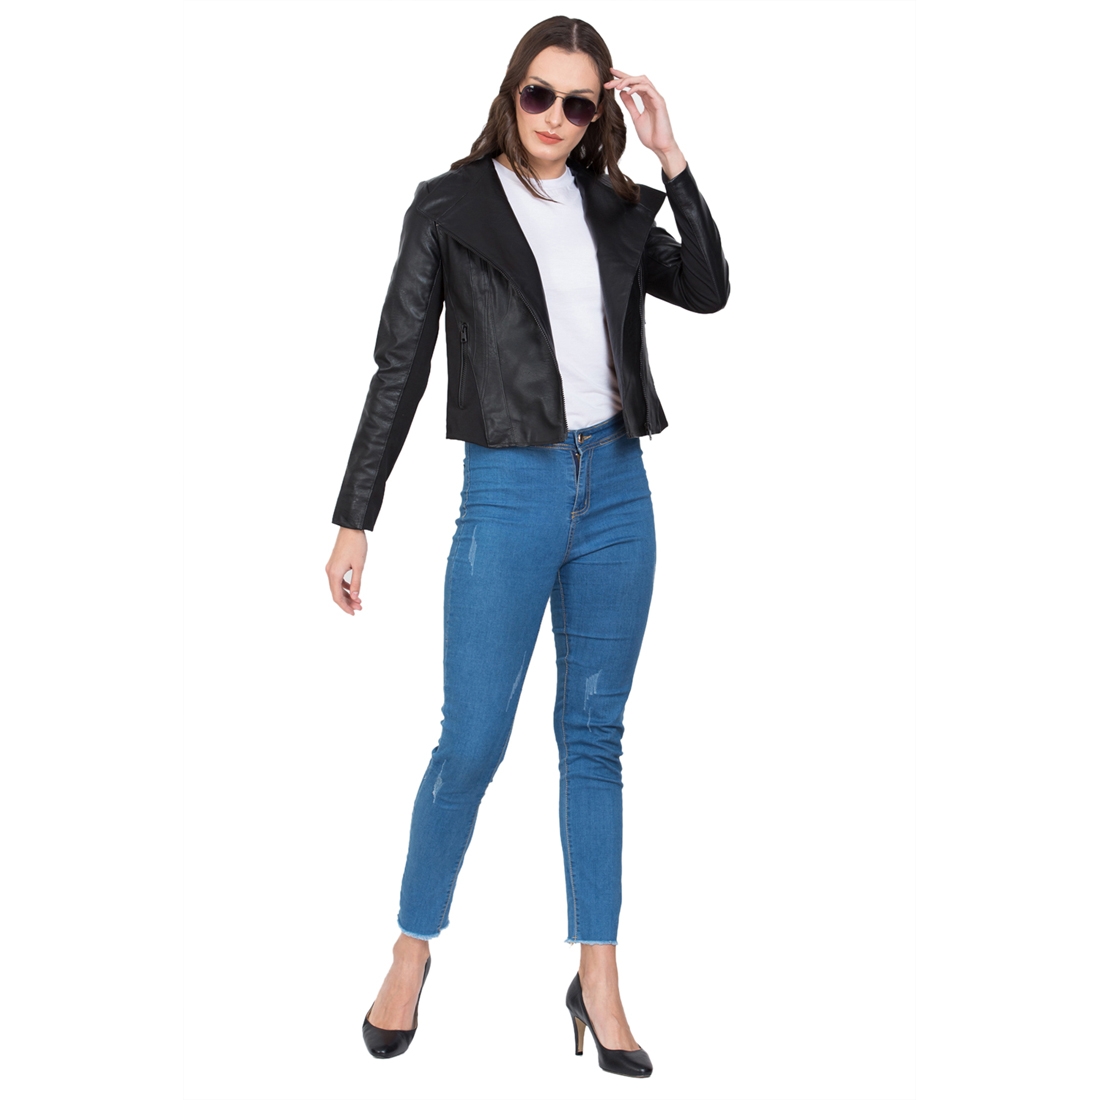 Justanned | JUSTANNED CARBON WOMEN LEATHER JACKET 6